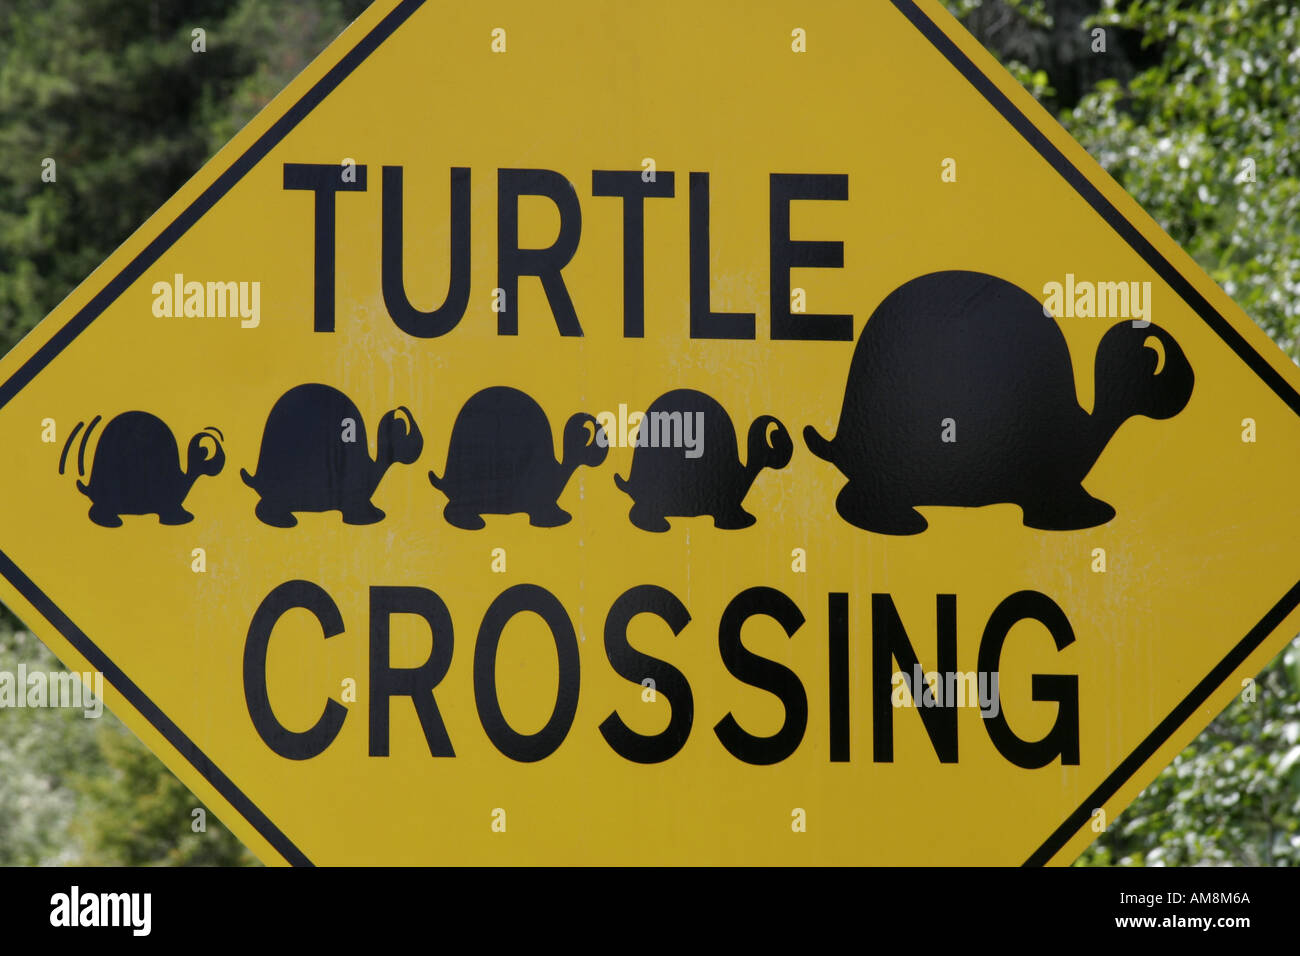 Turtle Crossing road sign Banque D'Images